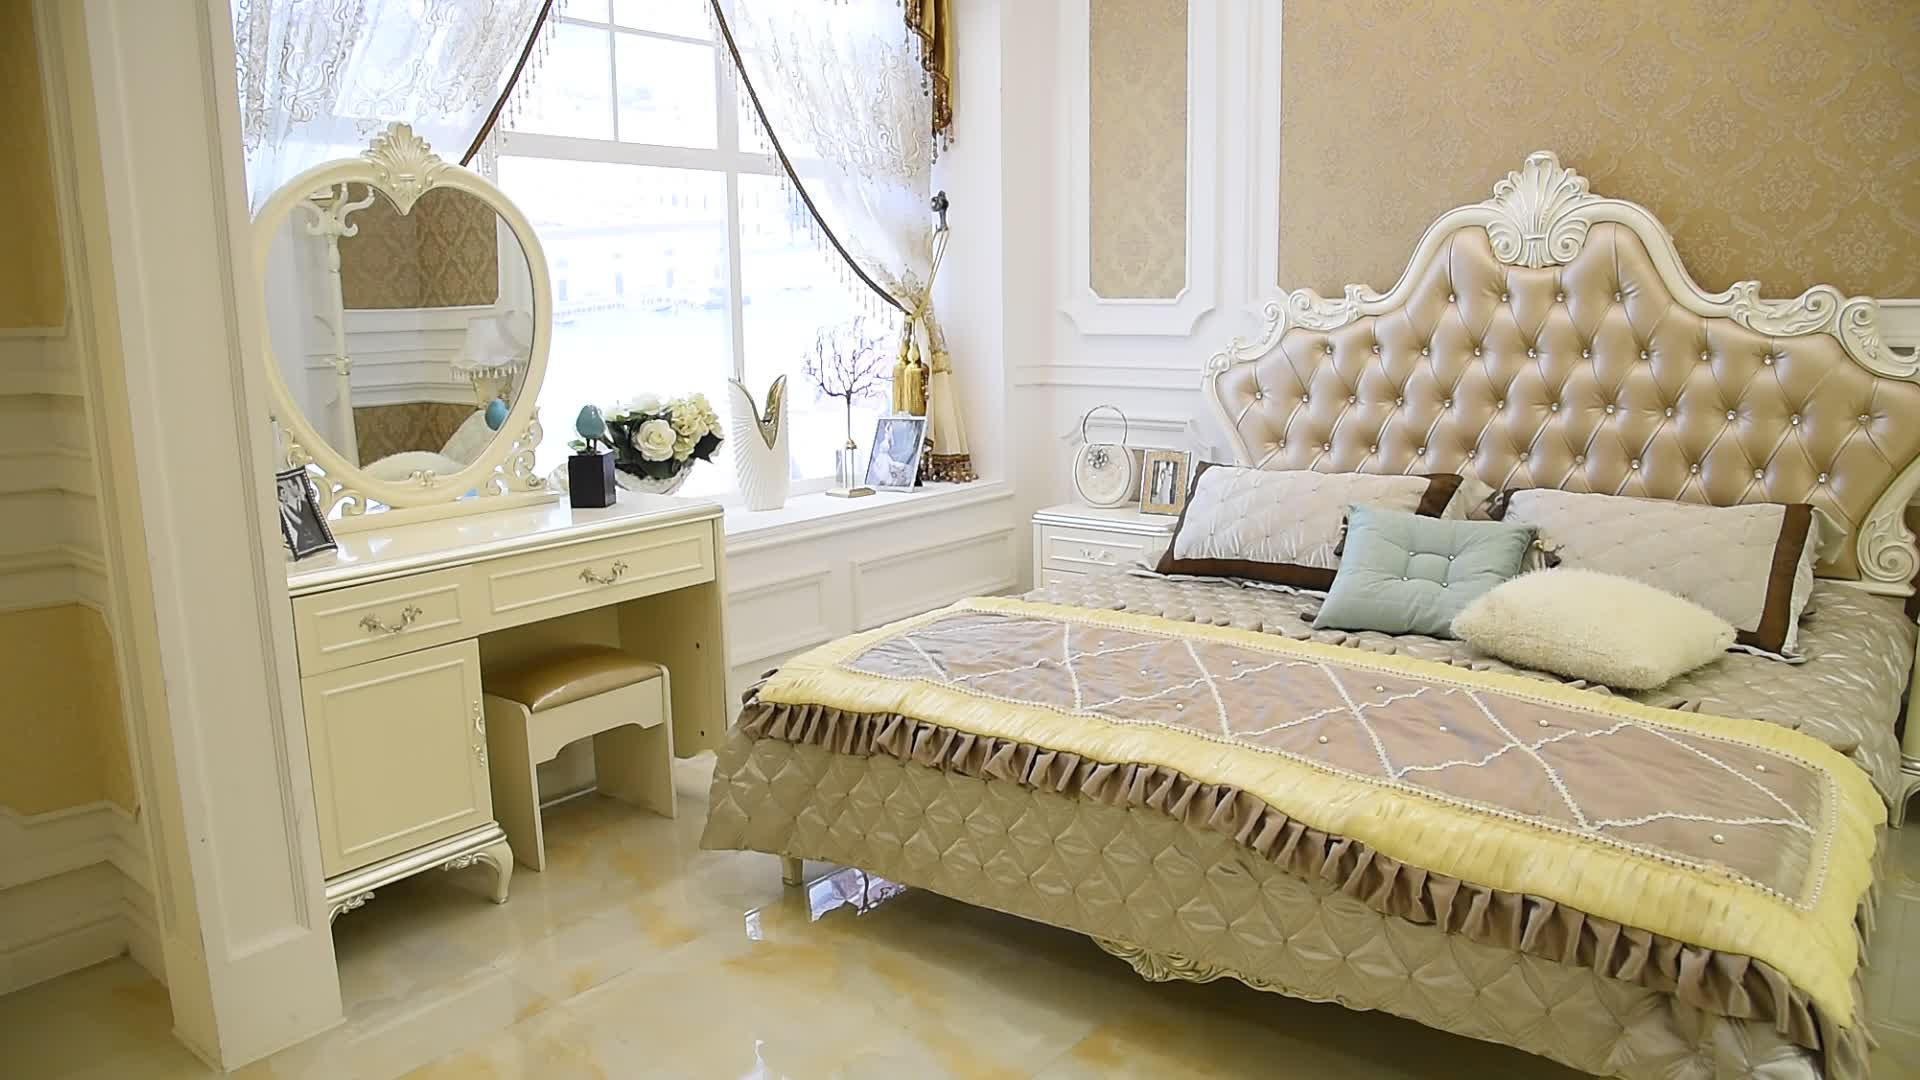 Cream Color Bedroom Set
 Classical Cream Colored Royal French Bedroom Set Luxury